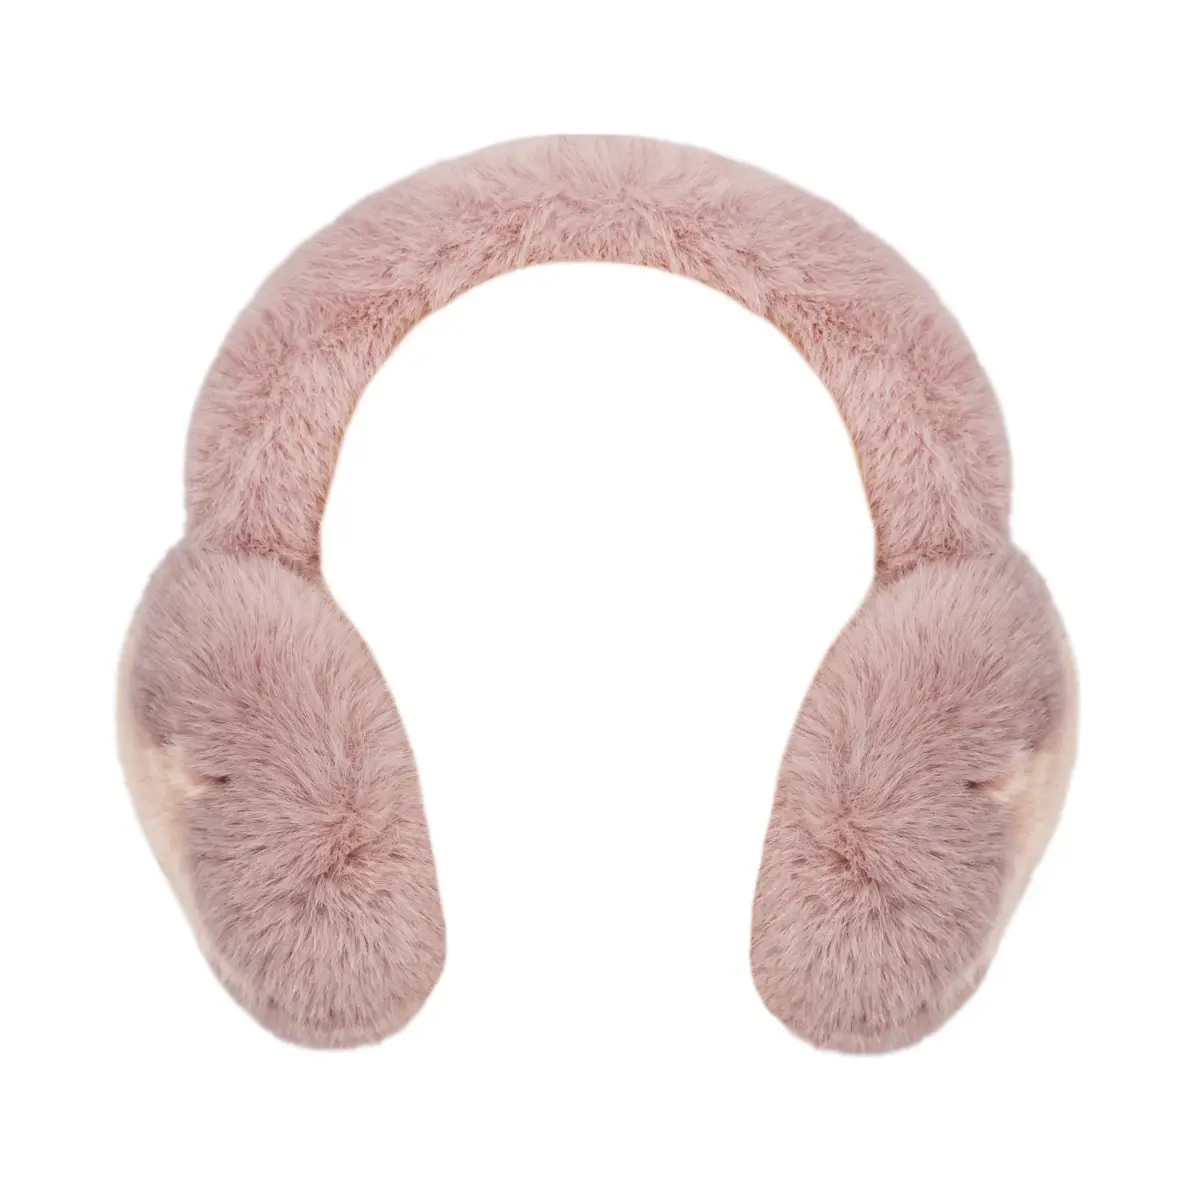 Emi Jay Sugar Muffs, $44, available here.